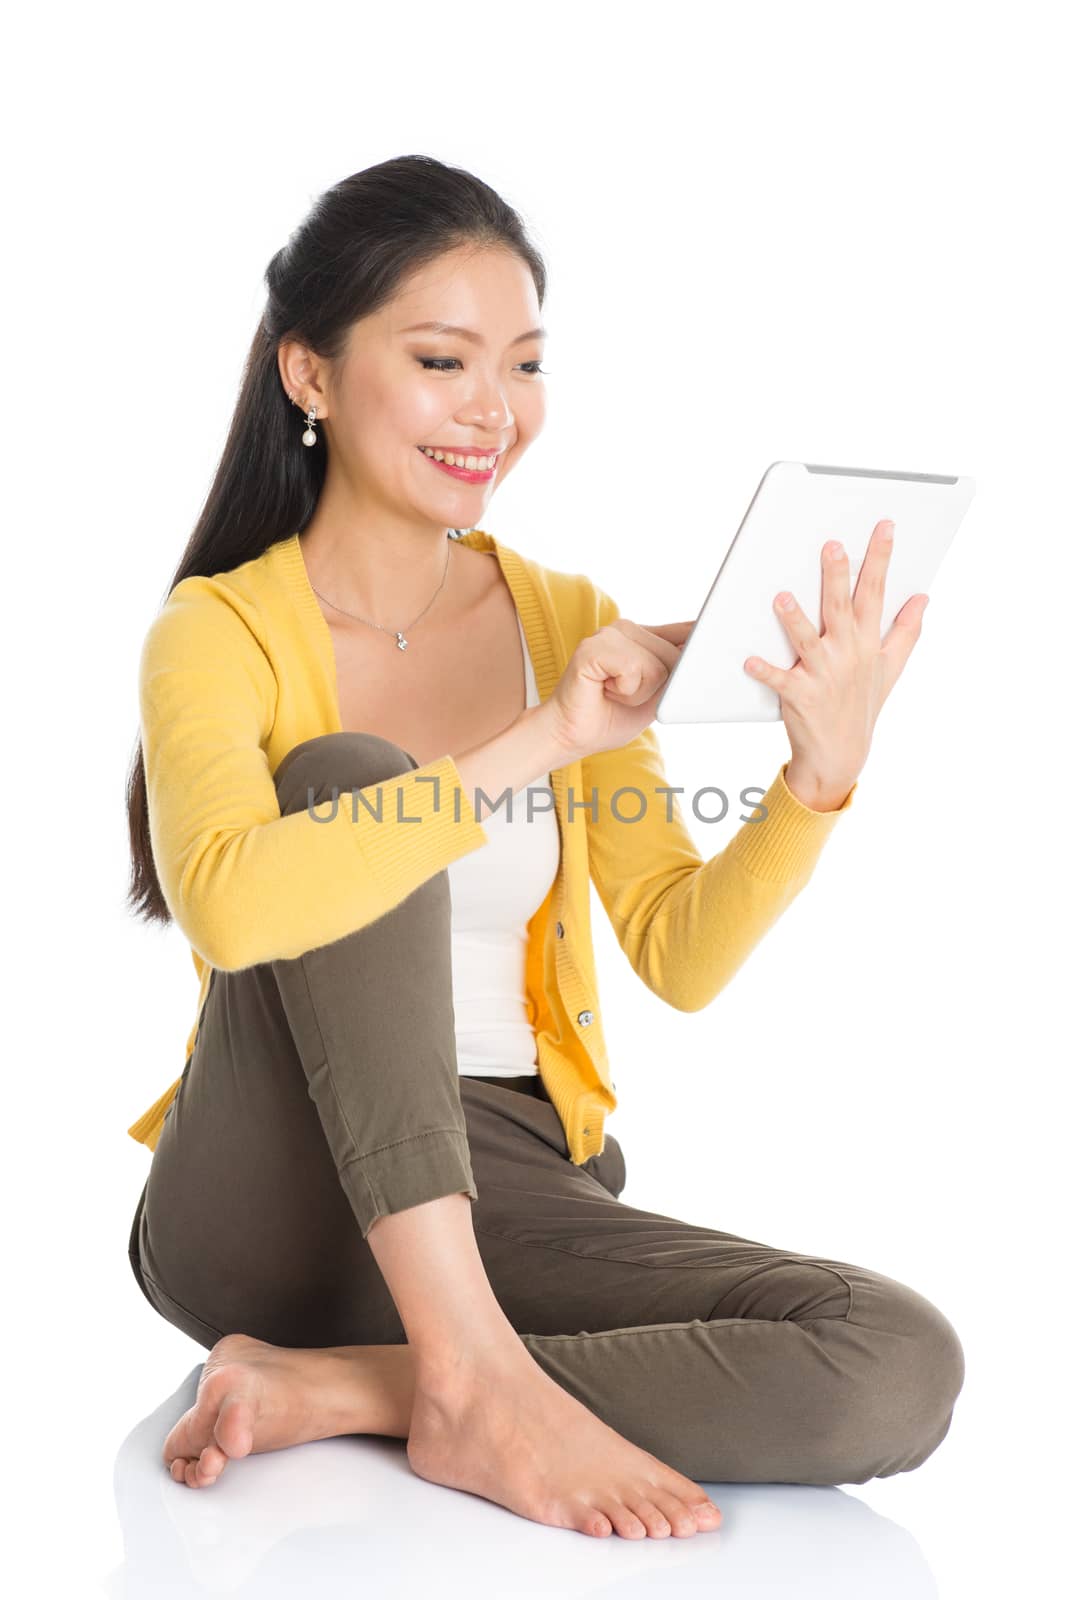 Full length portrait of casual Asian woman sitting on floor smiling and using touch screen tablet pc, isolated on white background.